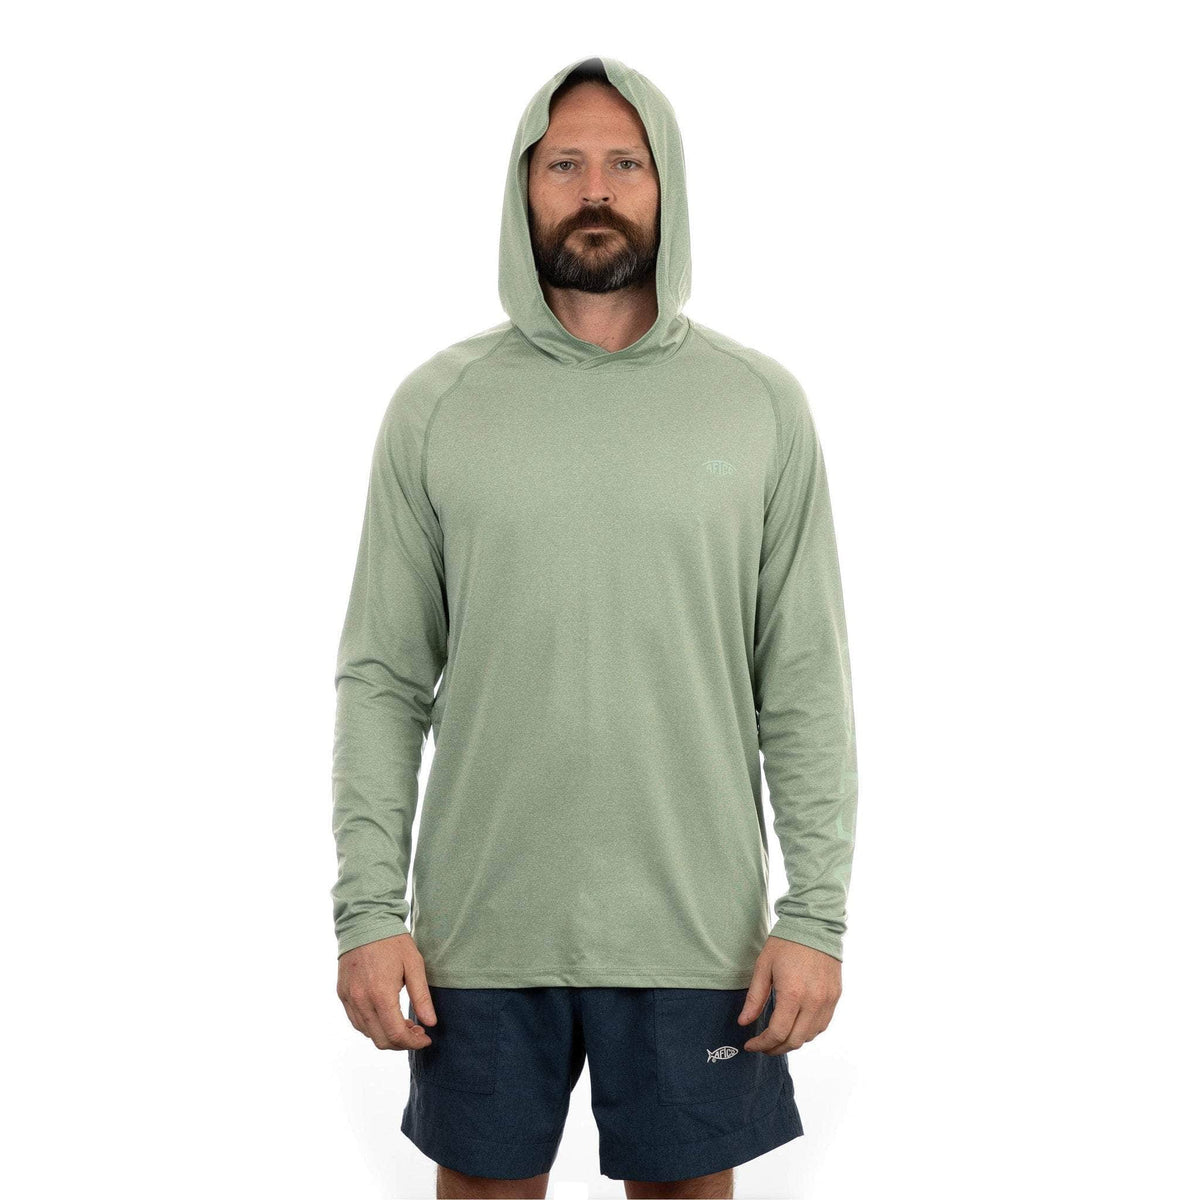 Aftco Jason Christie Performance Hooded LS Shirt Olive, 47% OFF